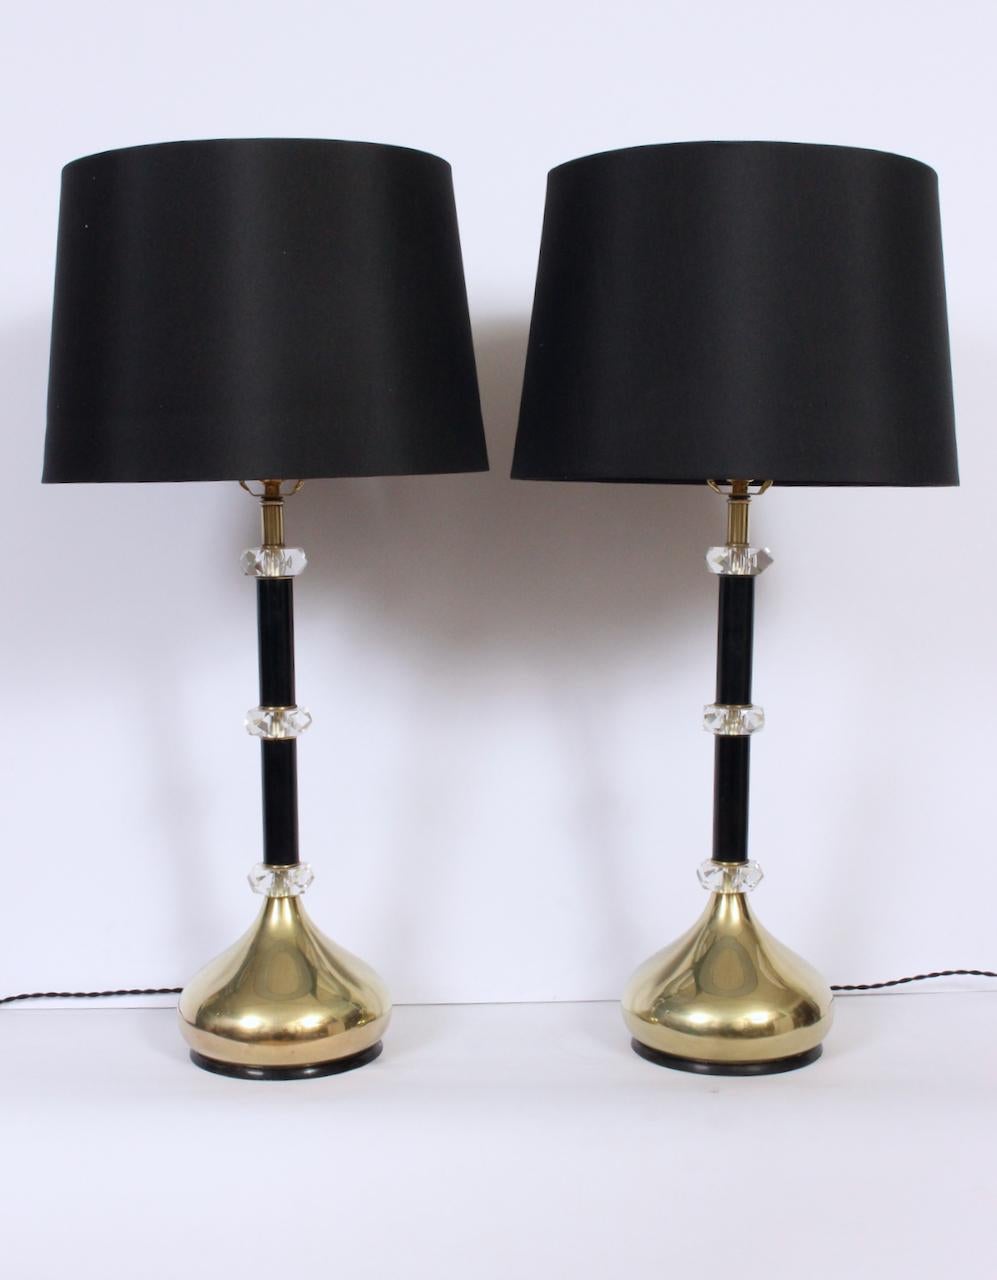 Substantial pair of Brass, Black Enamel and Faceted Lucite Crystal Table Lamps in the style of Frederick Cooper. Featuring Black enamel stems, three spaced faceted Lucite crystals per Lamp, rounded genie (golf club) style brass bases atop footed